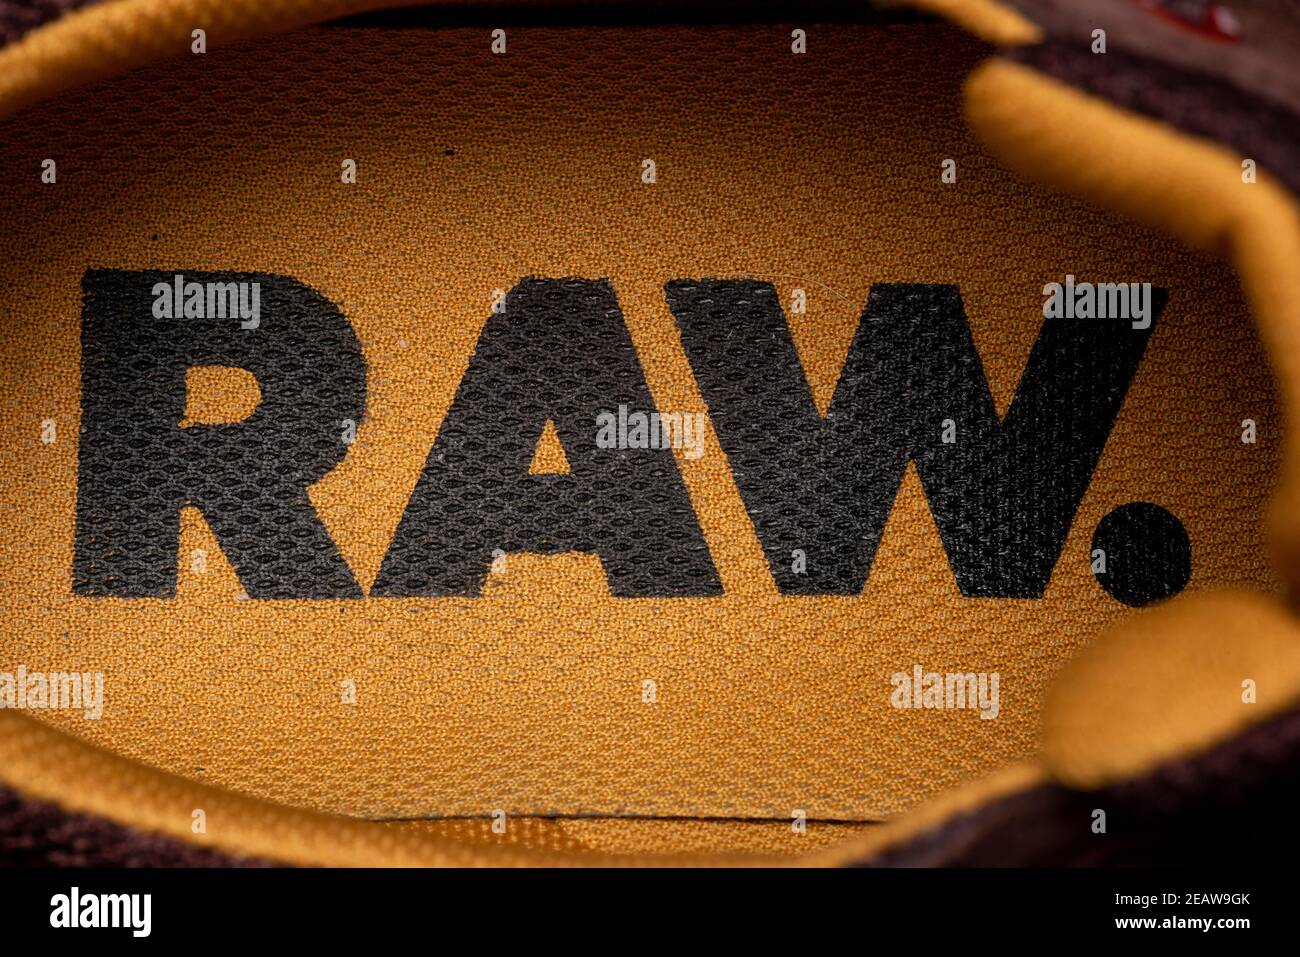 G-Star Raw casual men's shoes cushioning support orange insole close up  Stock Photo - Alamy